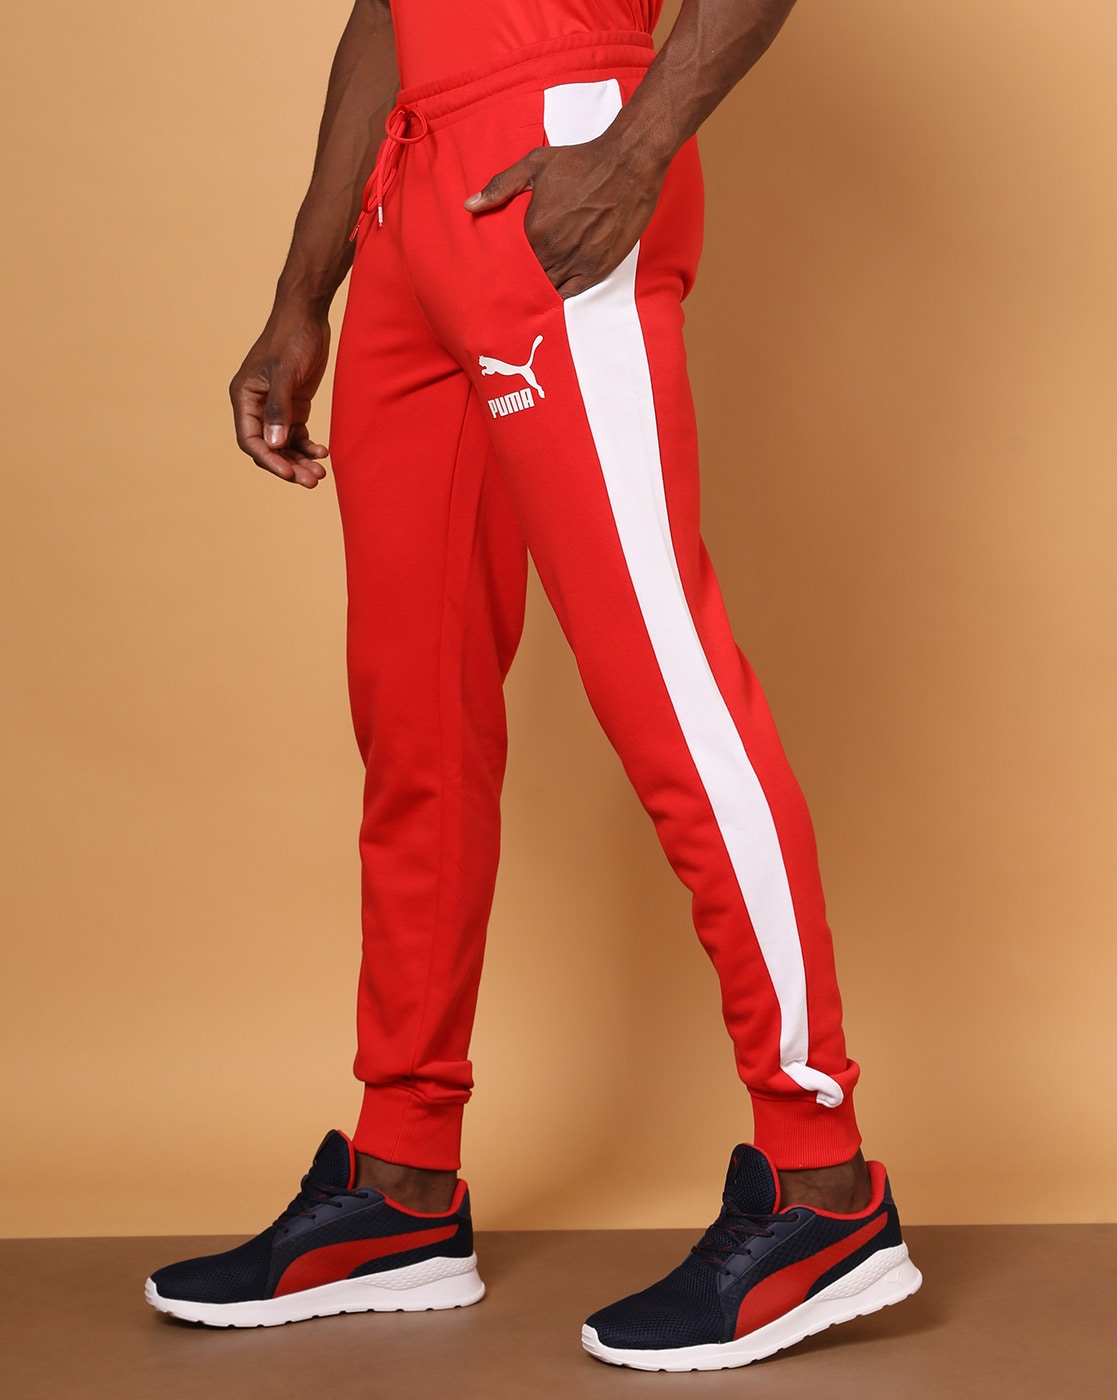 PUMA Men's Iconic T7 Track Pants : Amazon.in: Clothing & Accessories